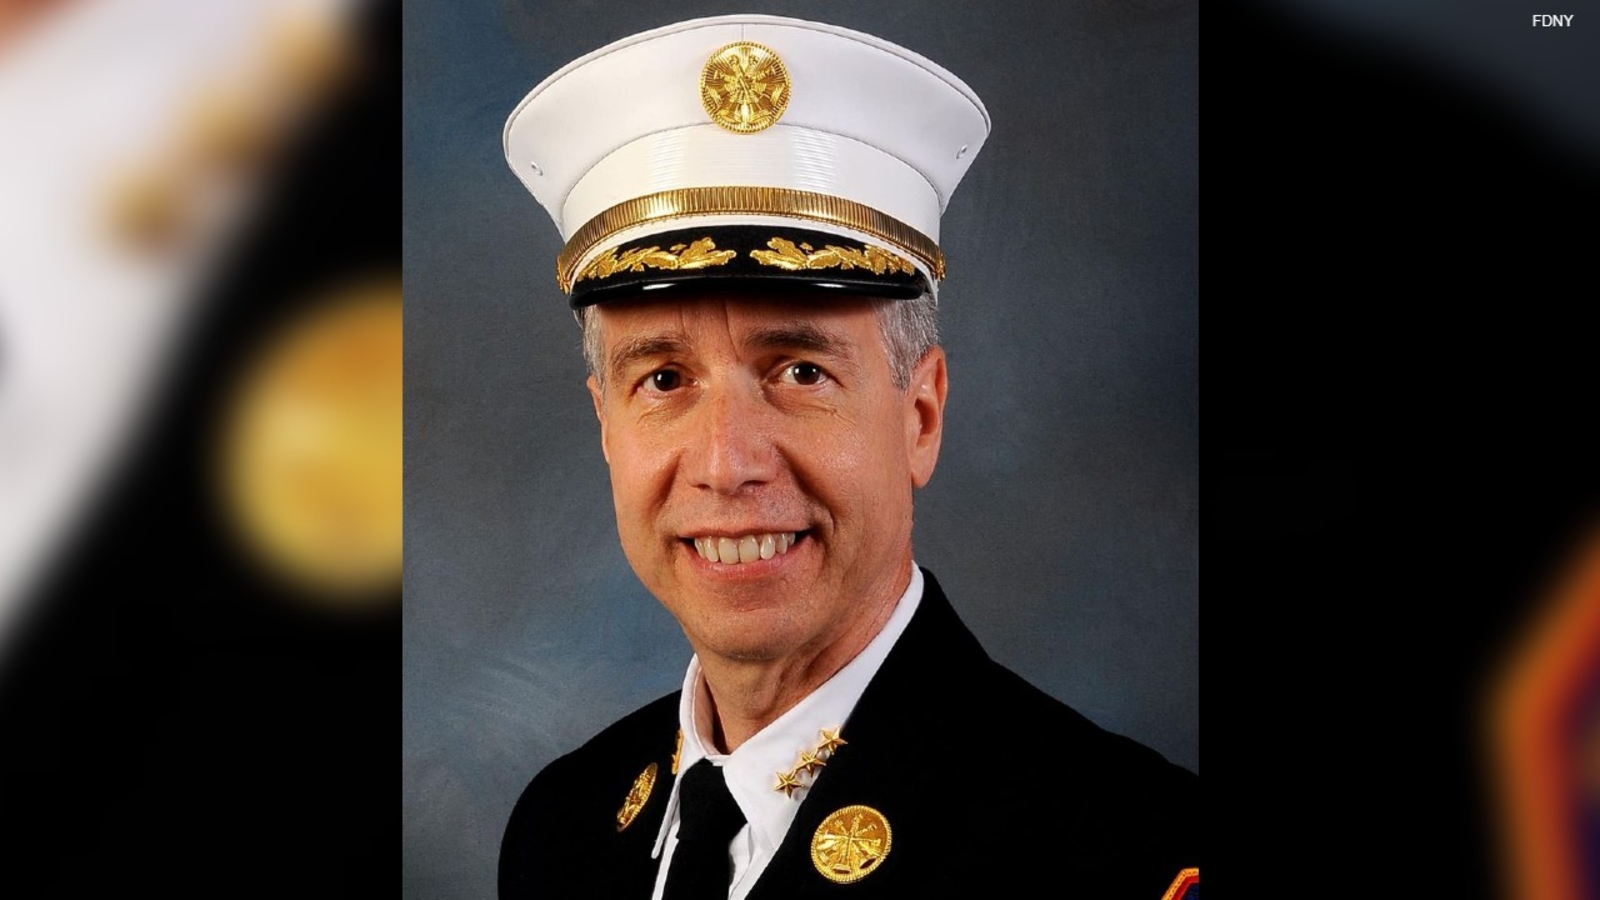 9/11 hero Joseph Pfeifer comes out of retirement to take new job with FDNY￼